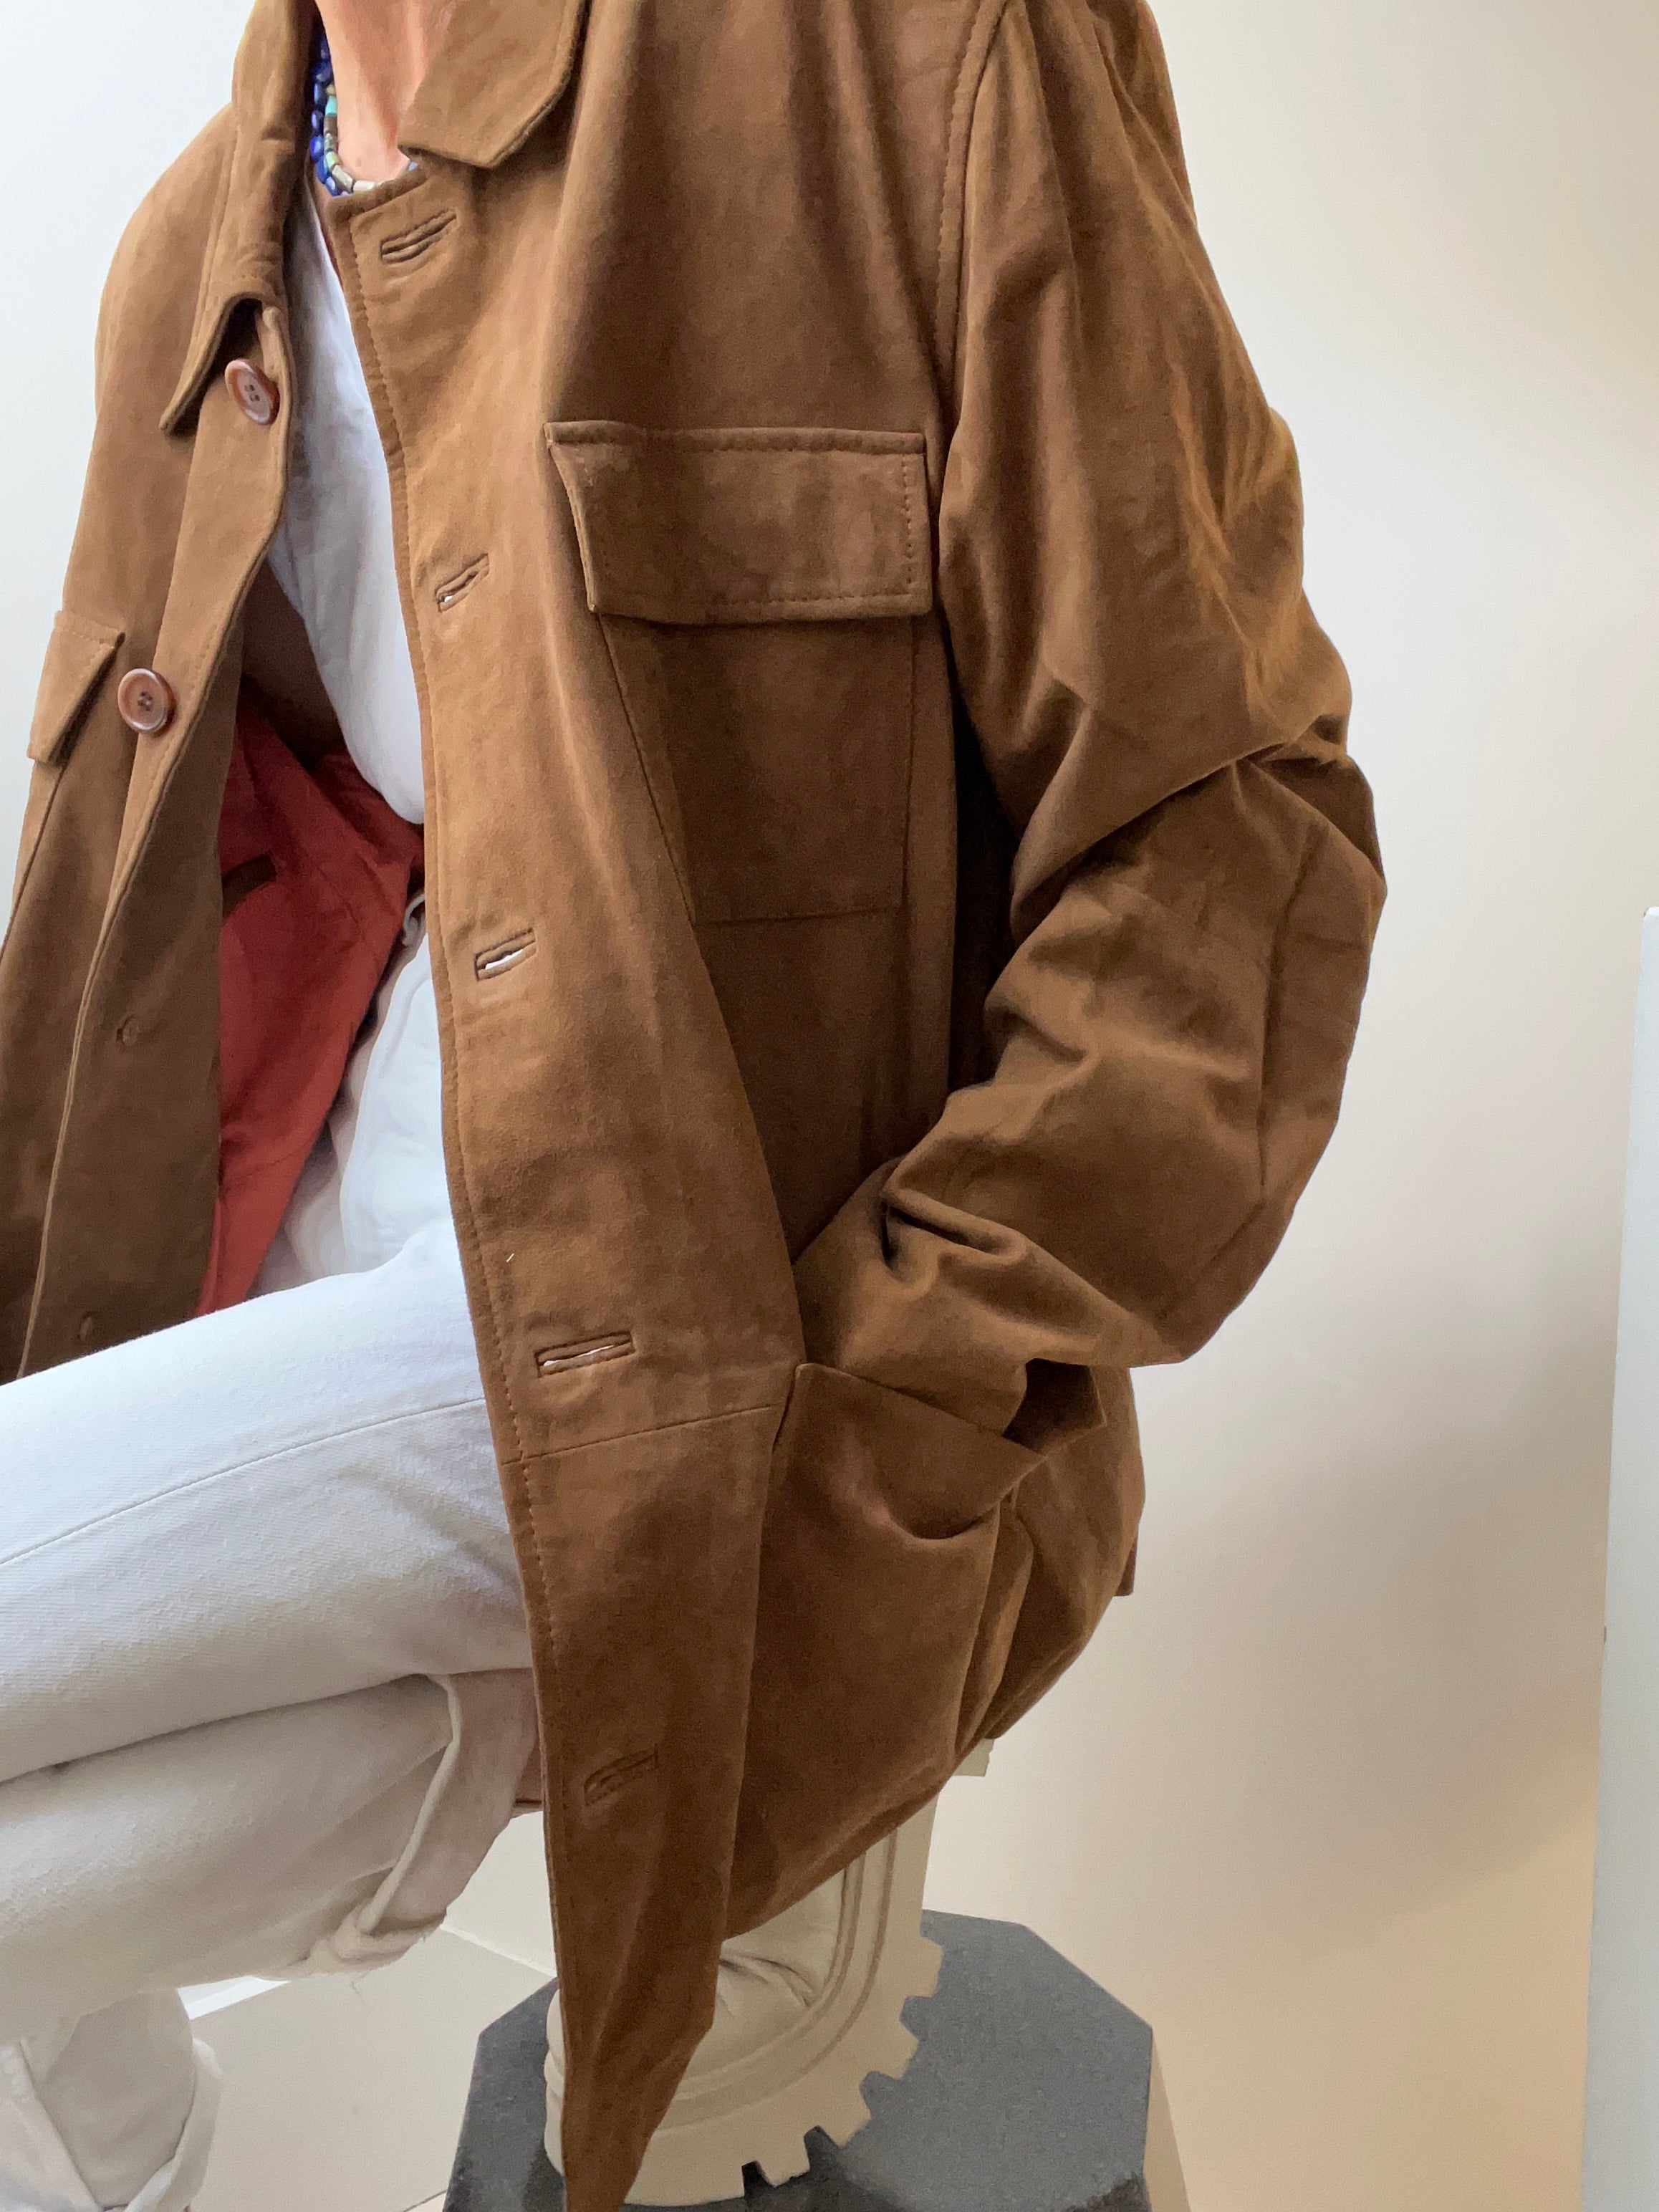 Not specified Jackets XLarge Four Pocket Suede Jacket Tan